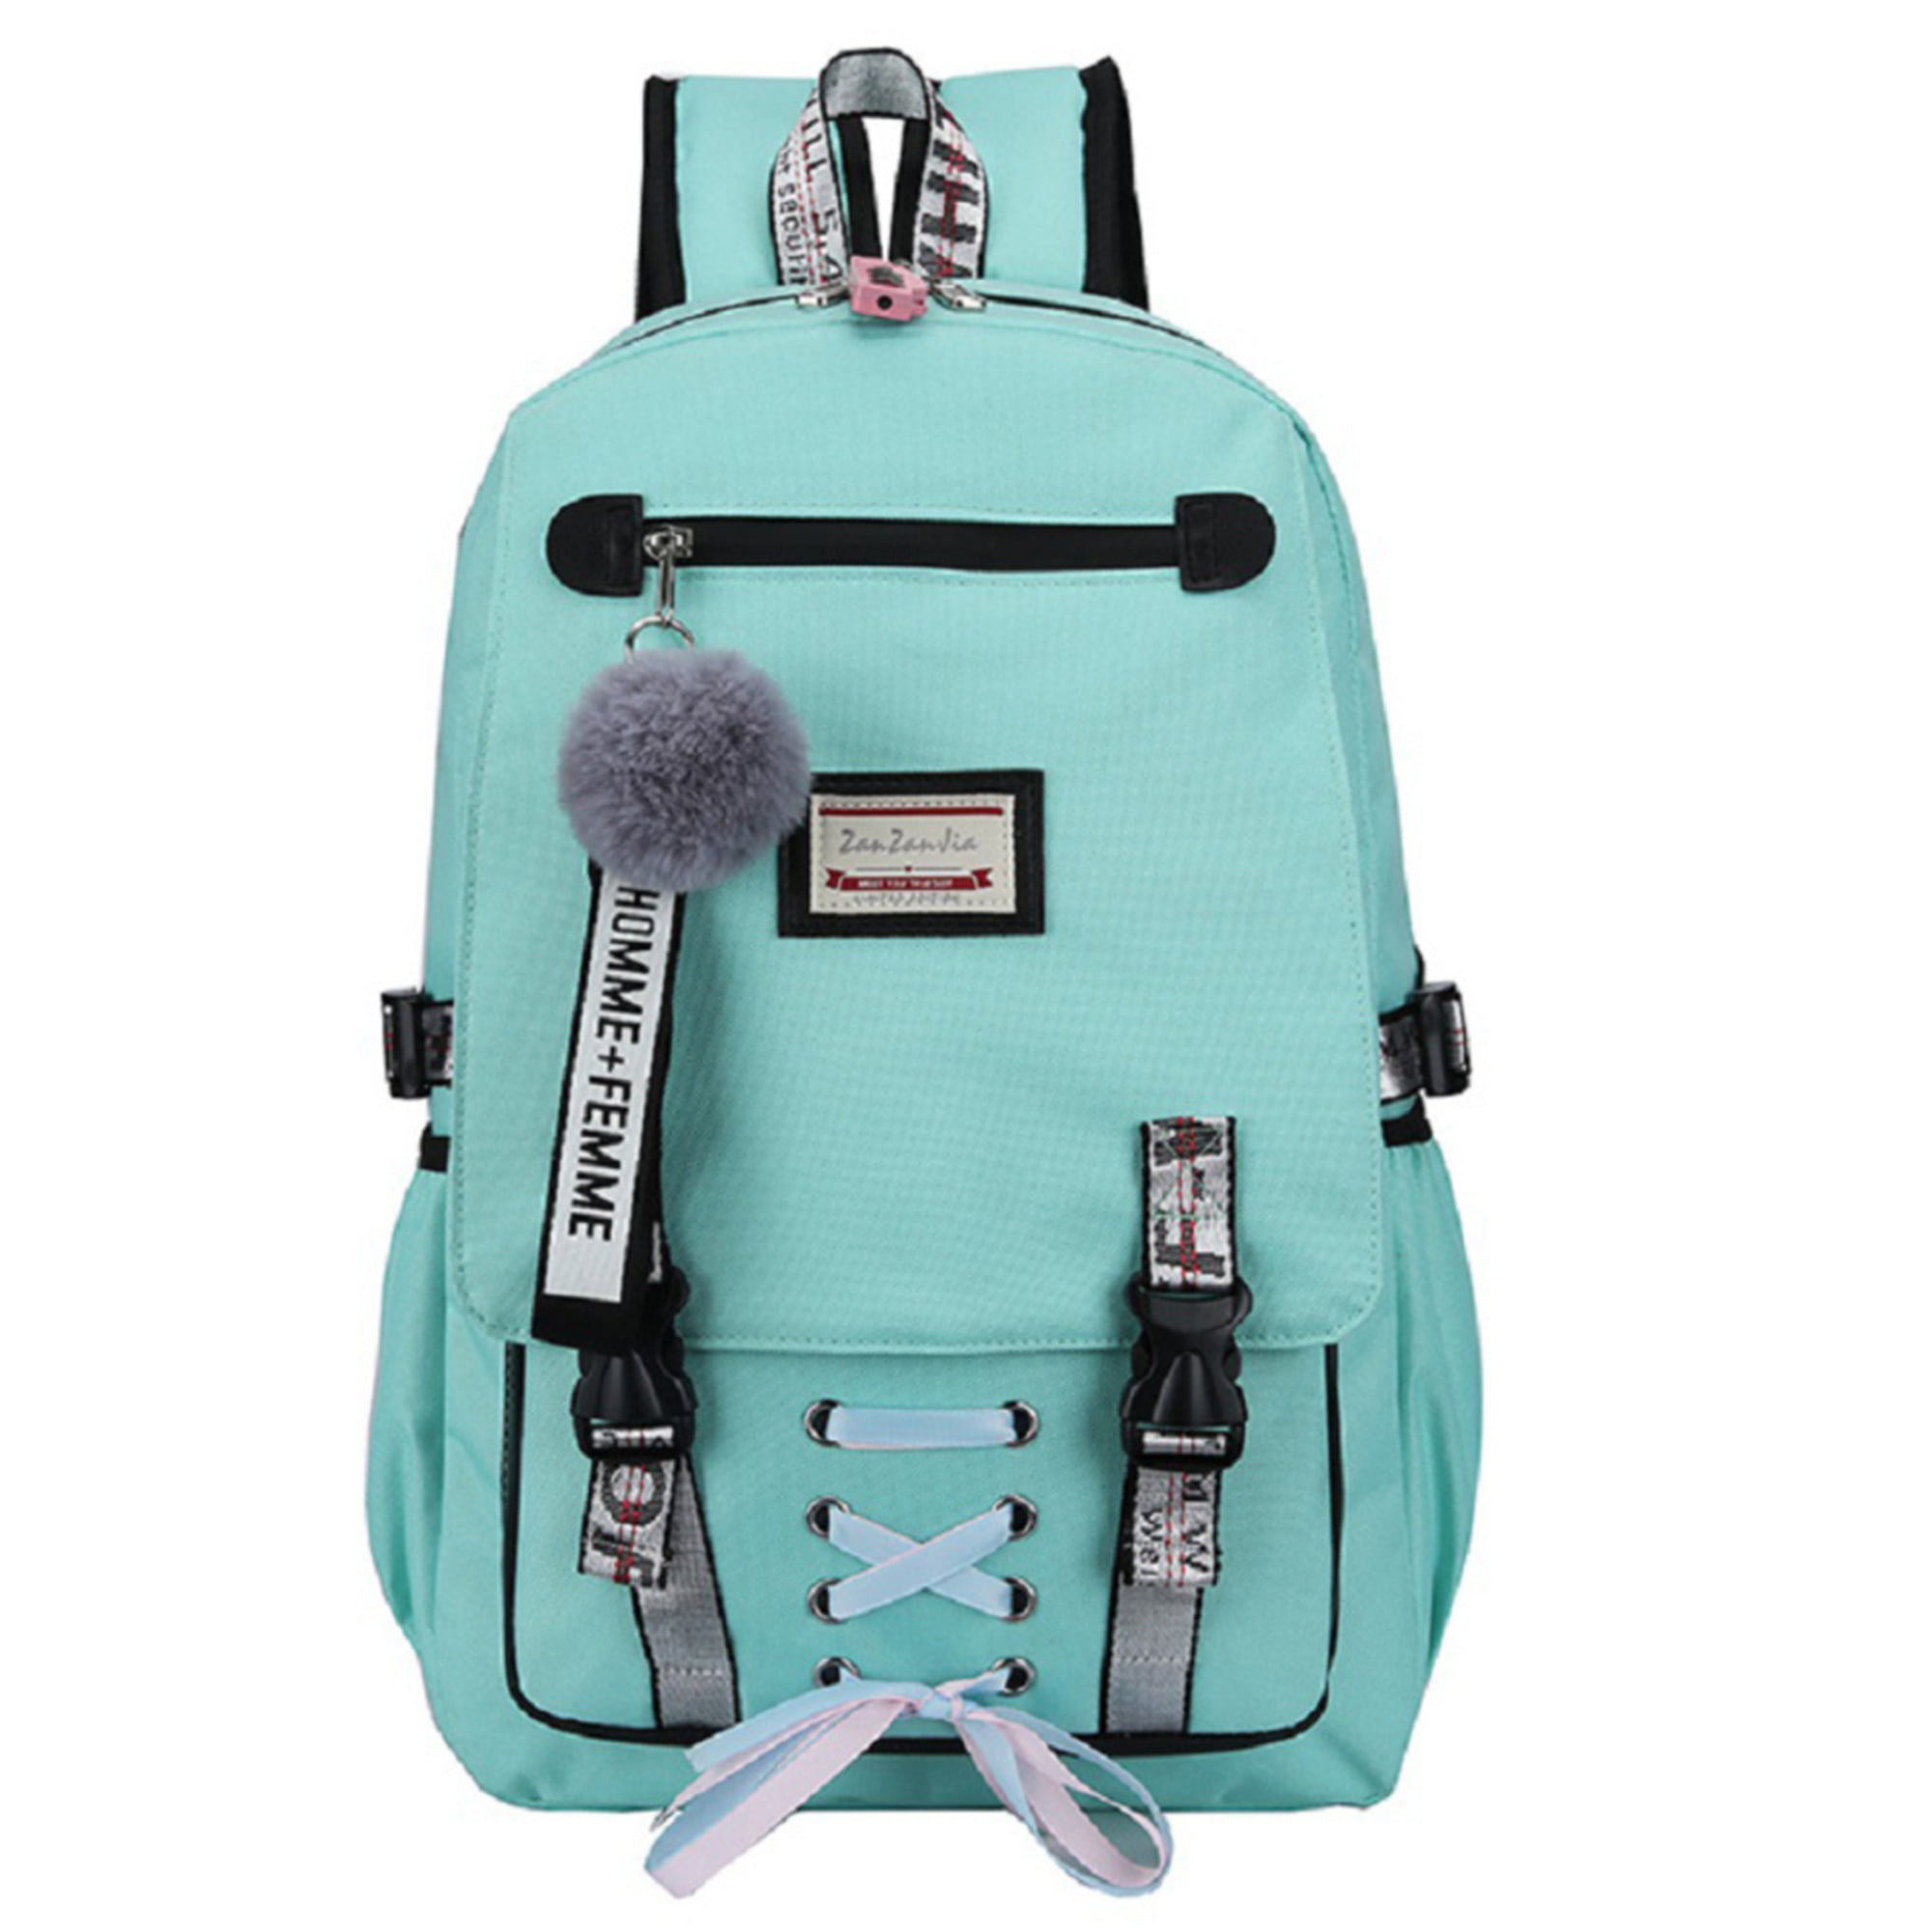 Rug-Ratsbackpack Anti-Theft Laptop Bookbag with USB Charging Port for School Student Casual Hiking